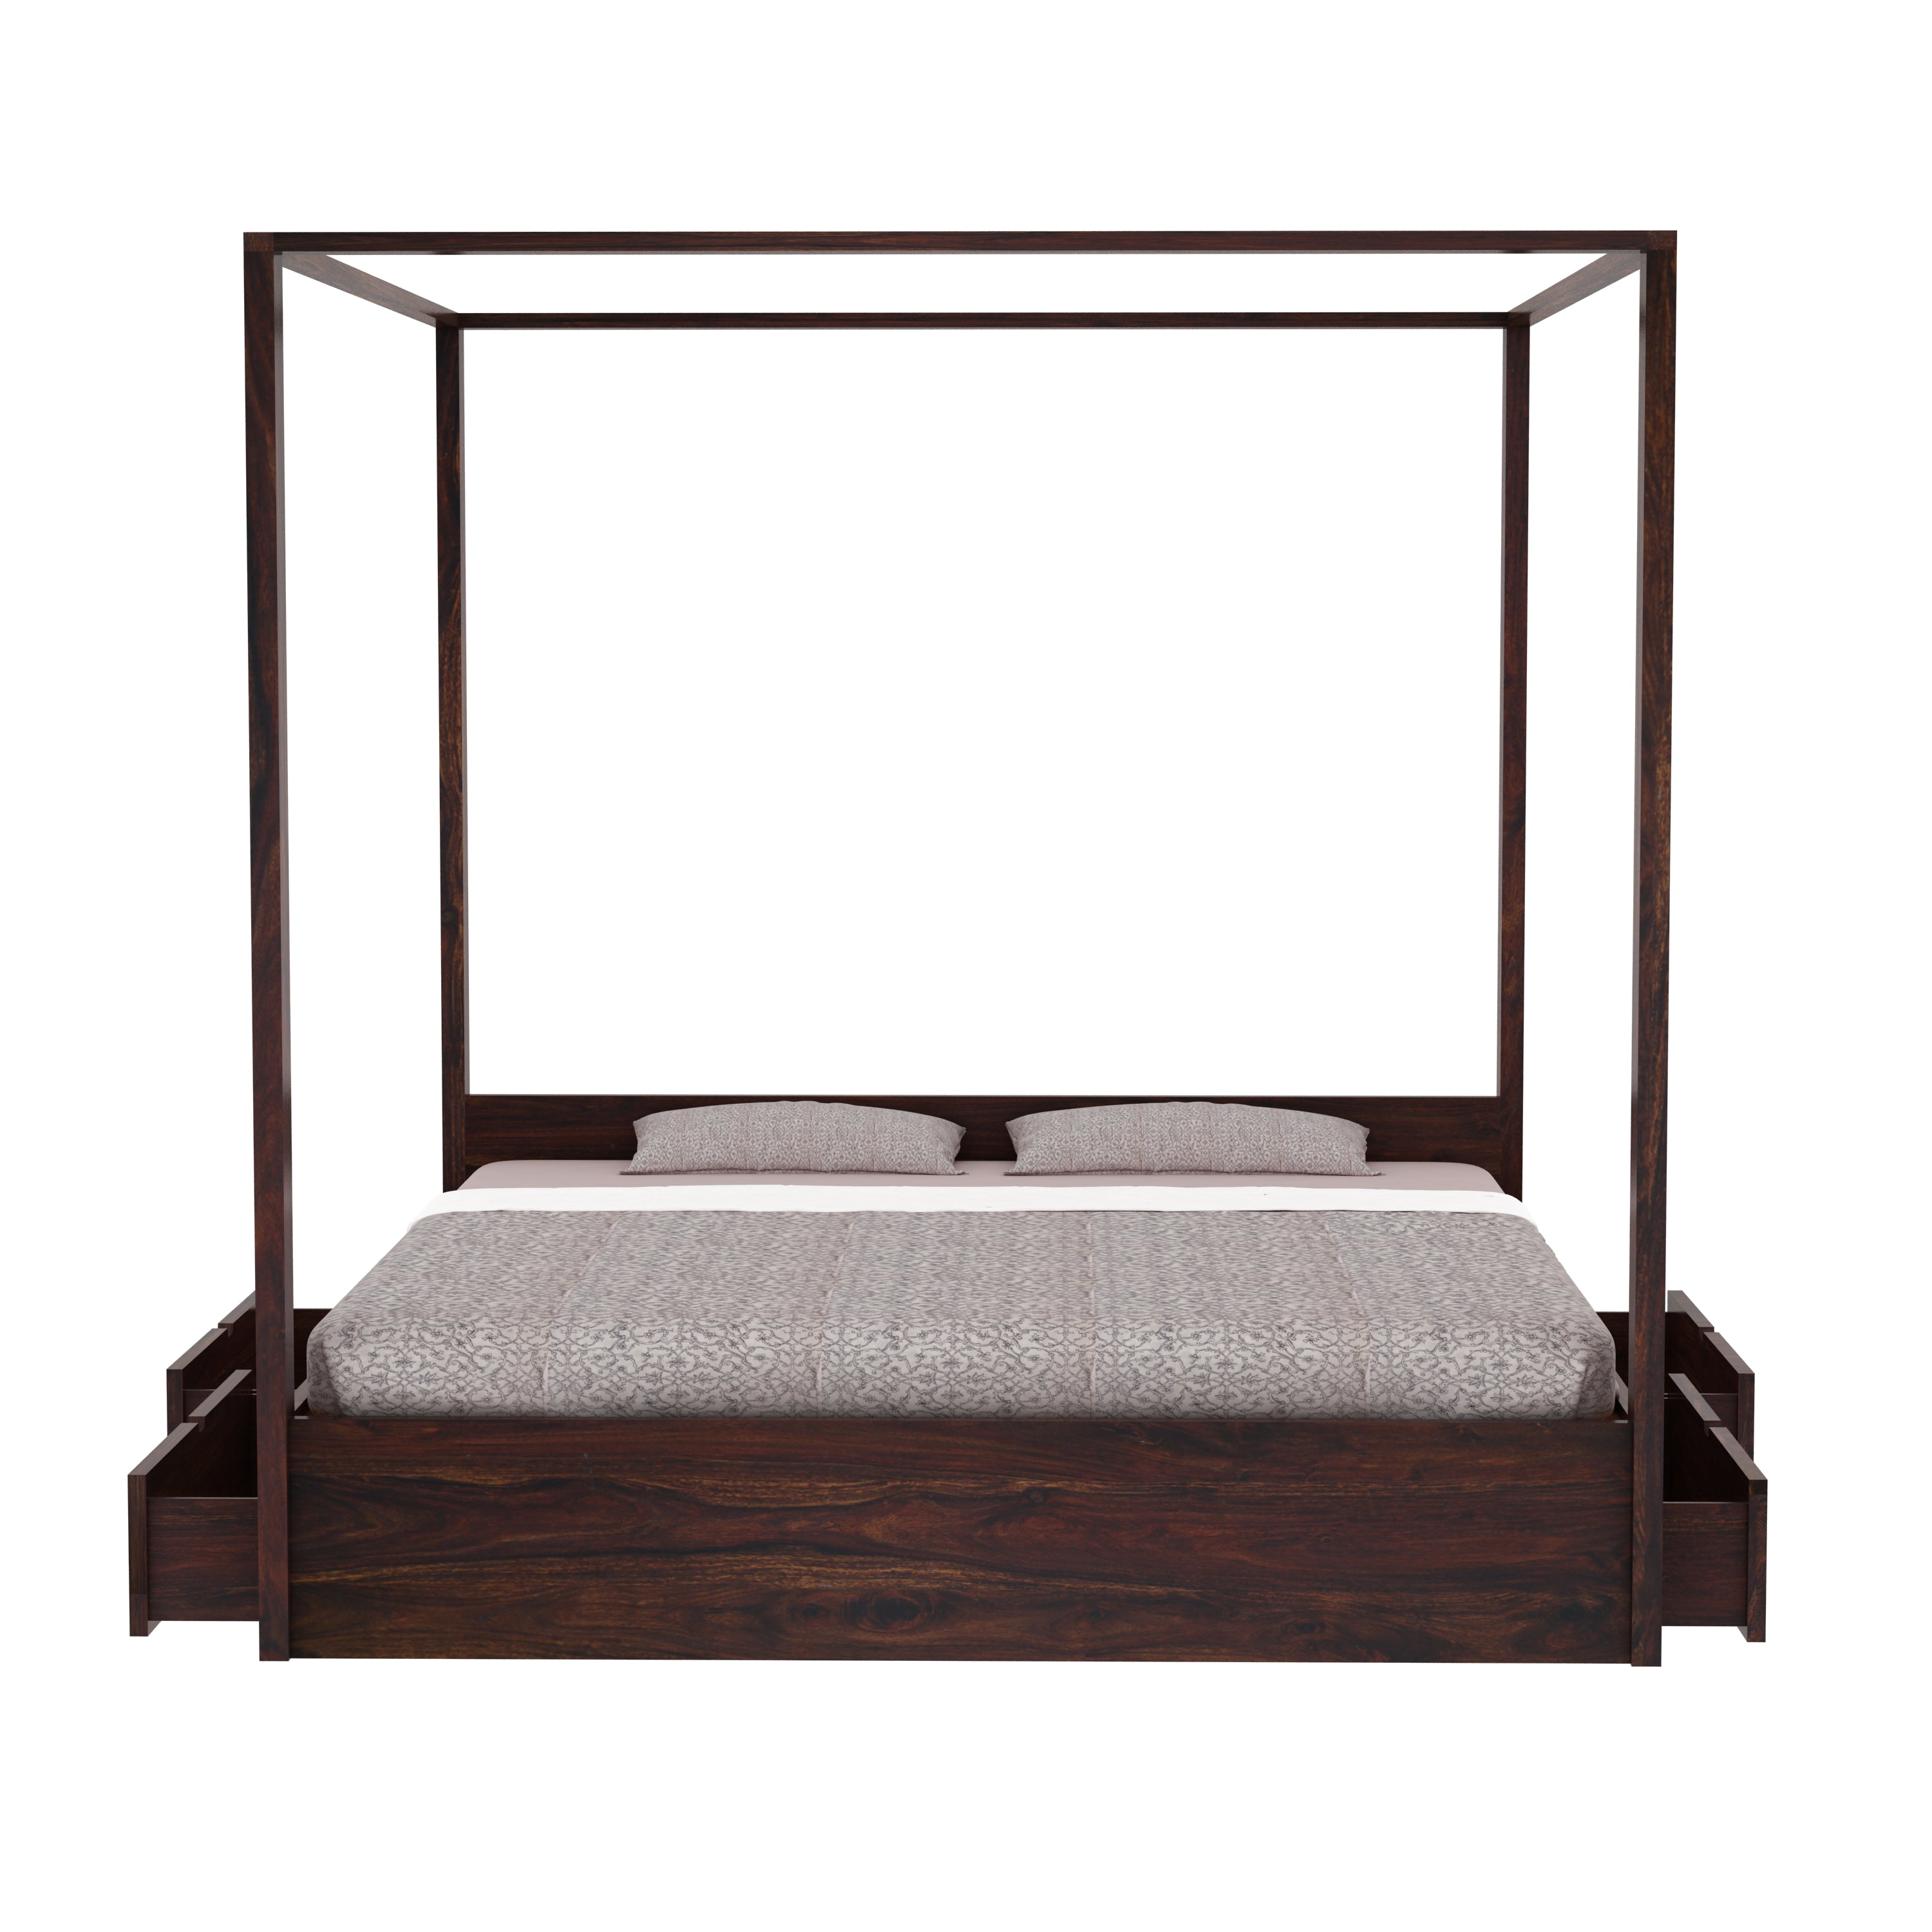 Solivo Solid Sheesham Wood Poster Bed With Four Drawers (Queen Size, Walnut Finish)